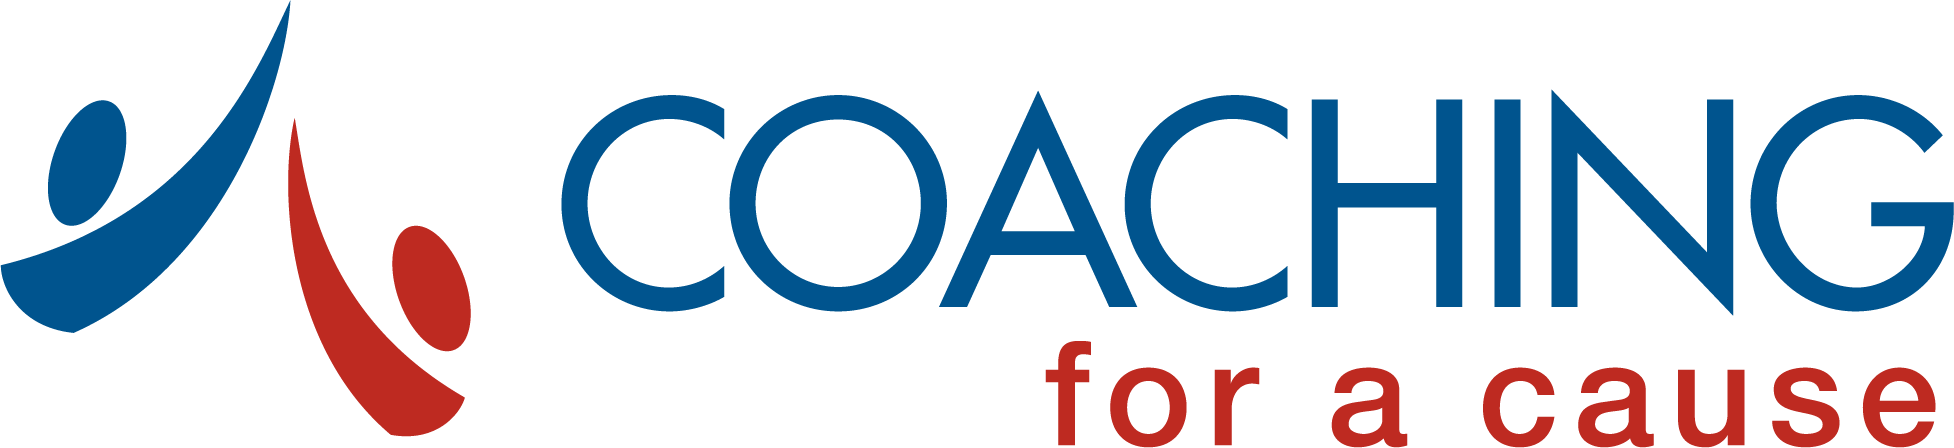 Coaching for a Cause Logo